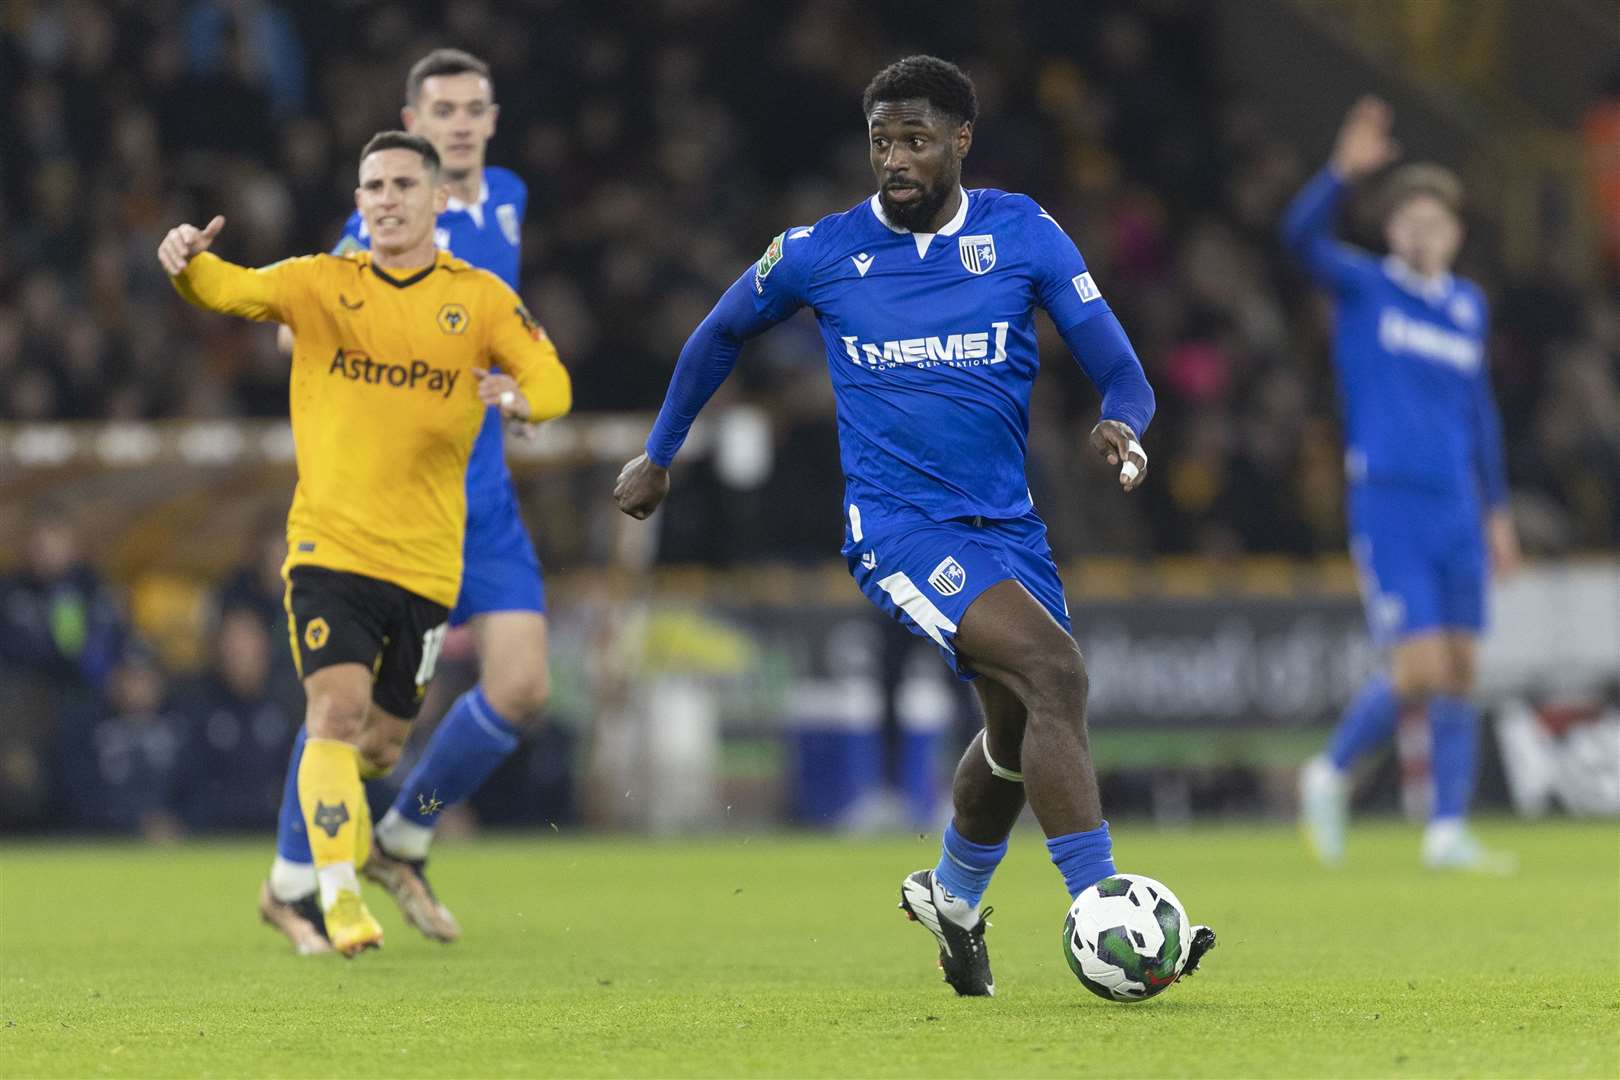 Gillingham were beaten 2-0 by Wolves in the Carabao Cup